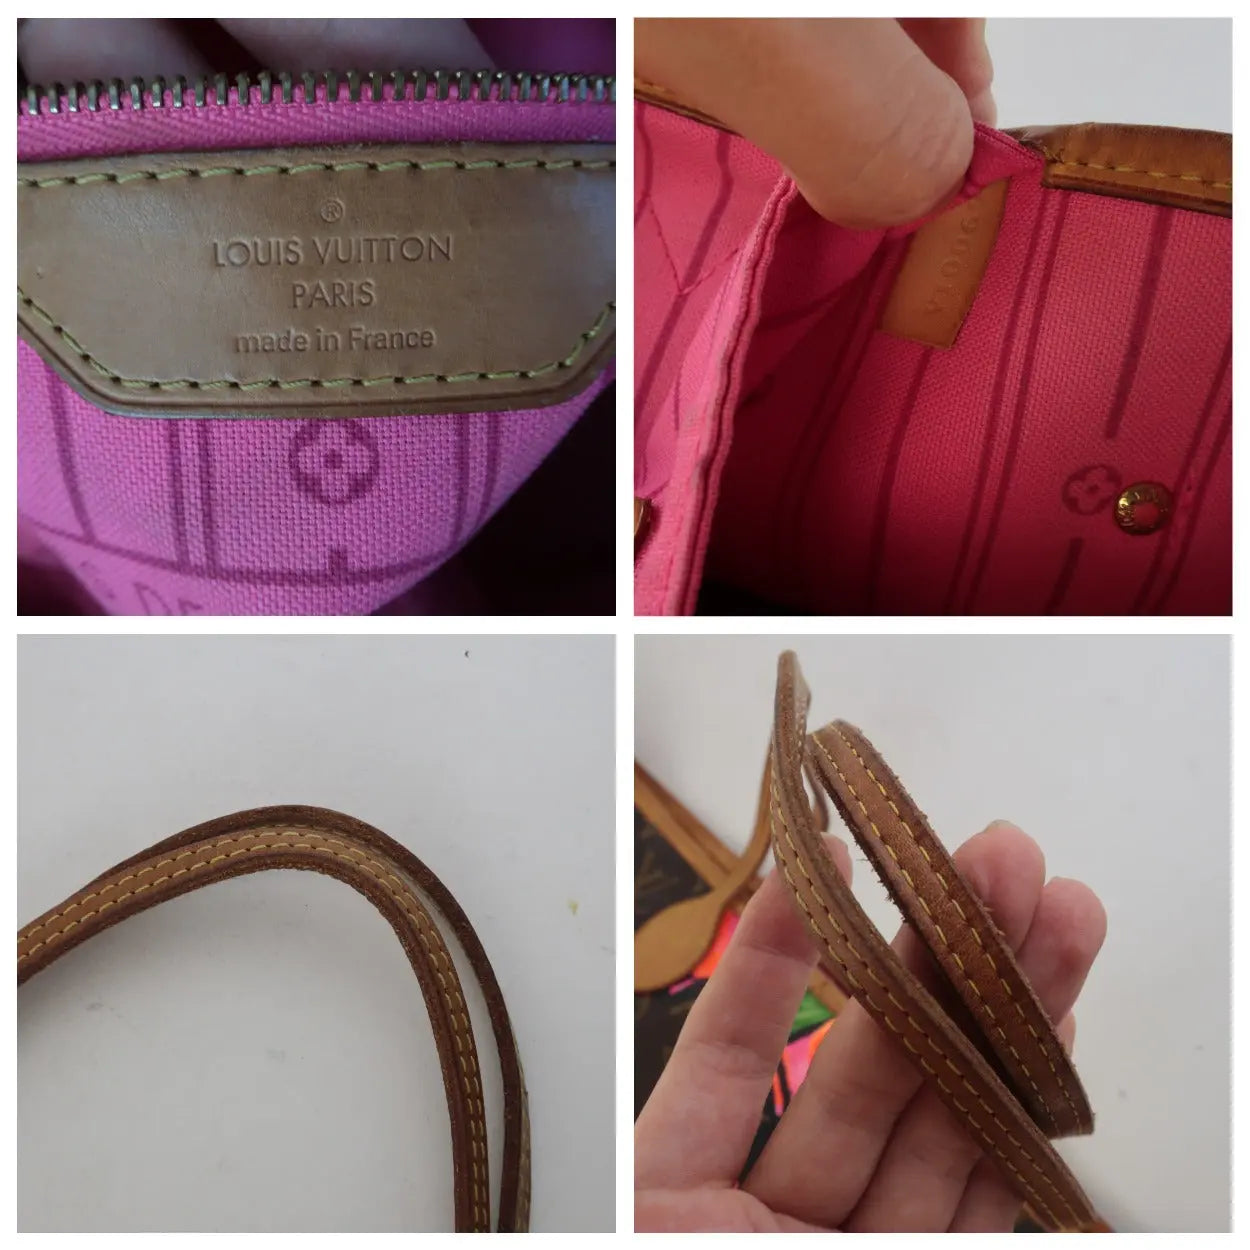 Louis Vuitton, Bags, Louis Vuitton Stephen Sprouse Rose Neverfull Htf